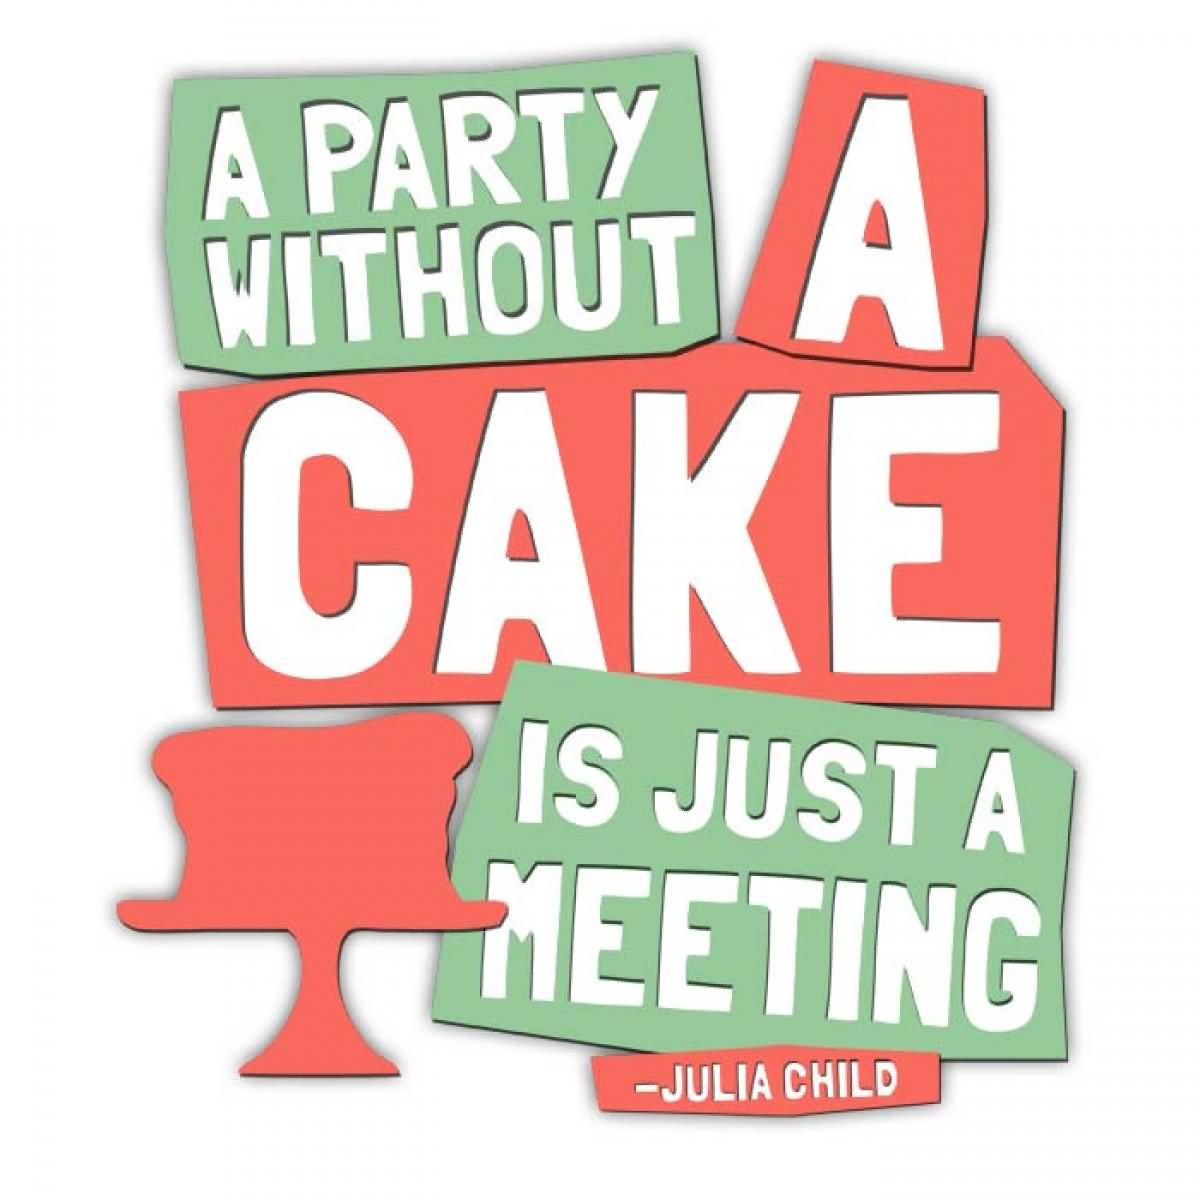 A party without cake is just a meeting. (1)